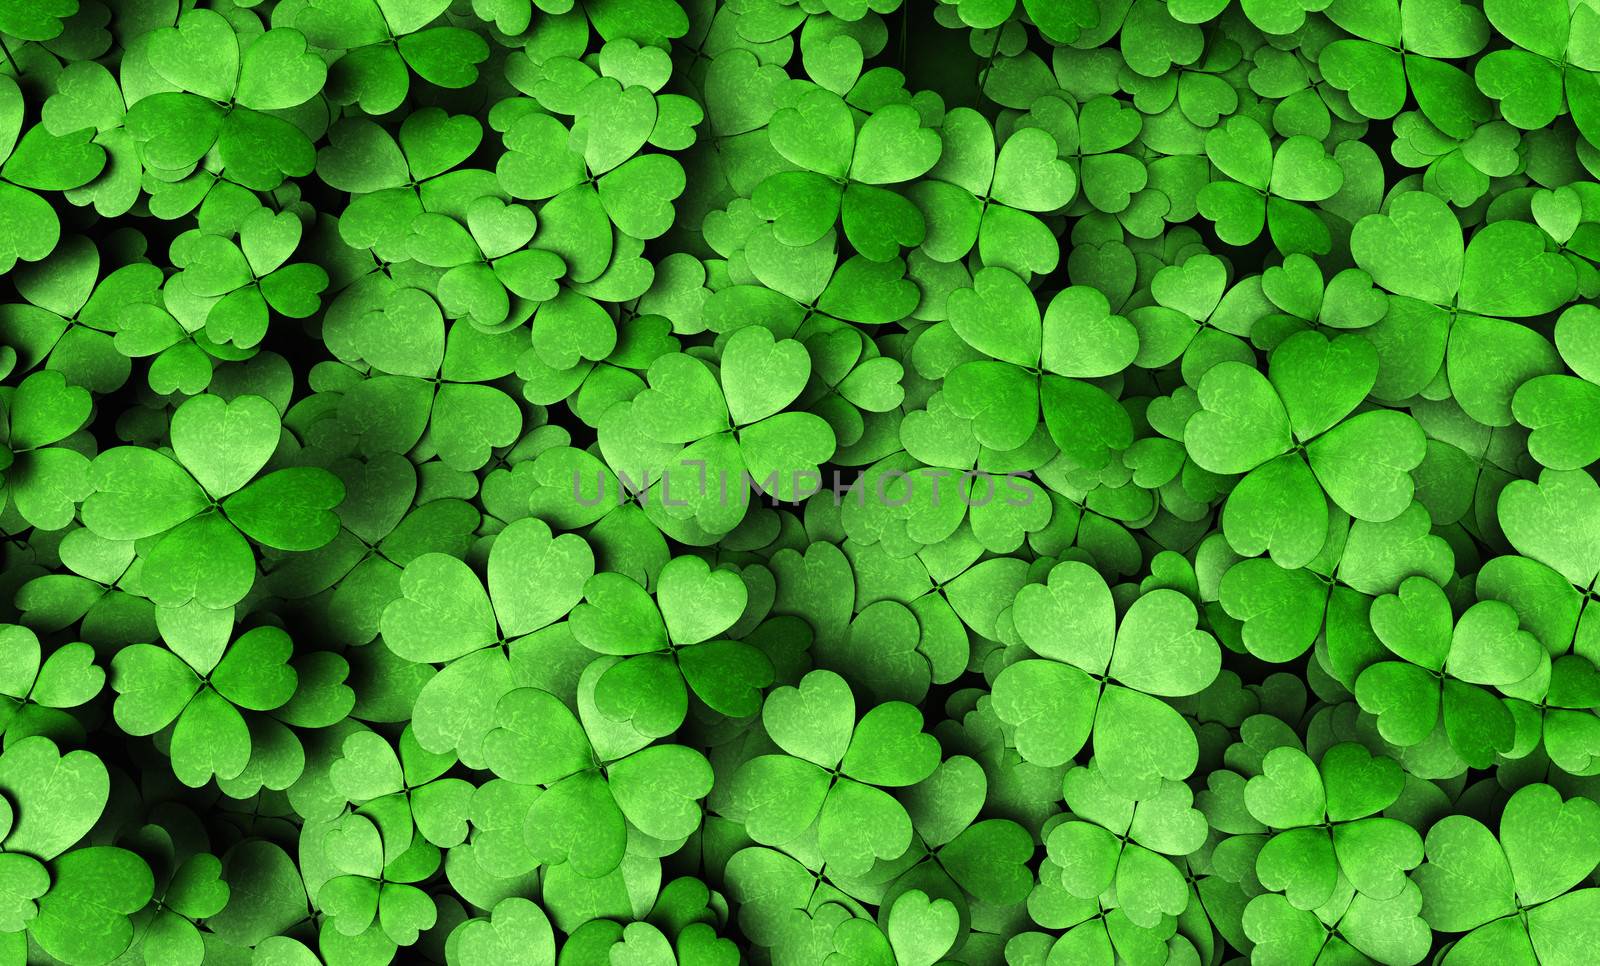 Expanse of four-leaf clovers by TaiChesco